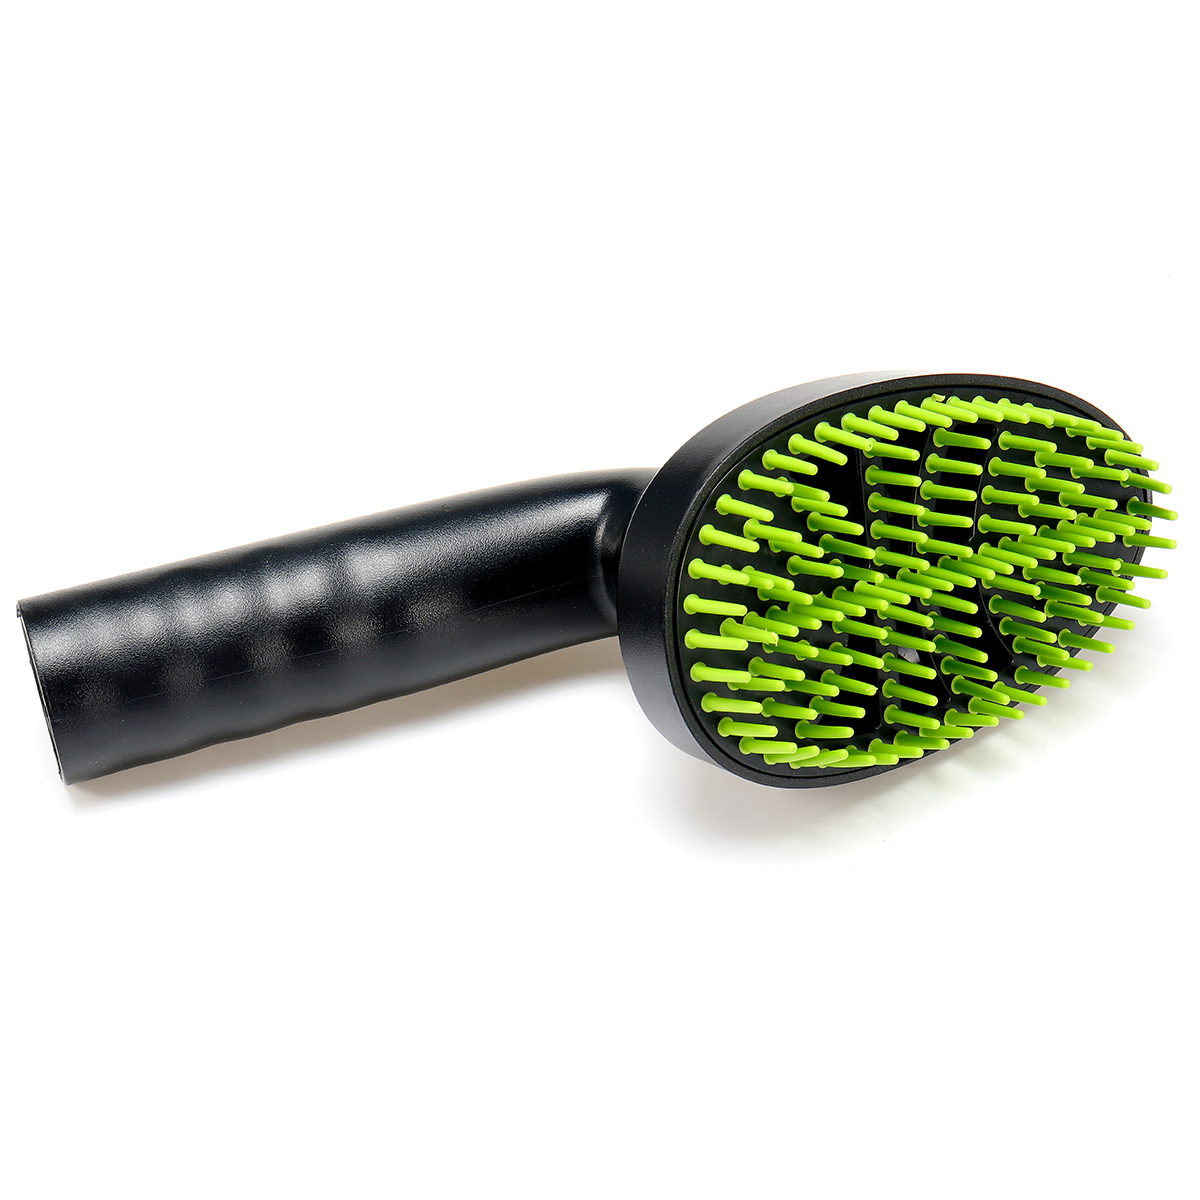 

Pet Dog Hair Grooming Cleaning Brush Vacuum Cleaner Loose 32mm Attachment Tool for Dyson Vacuums